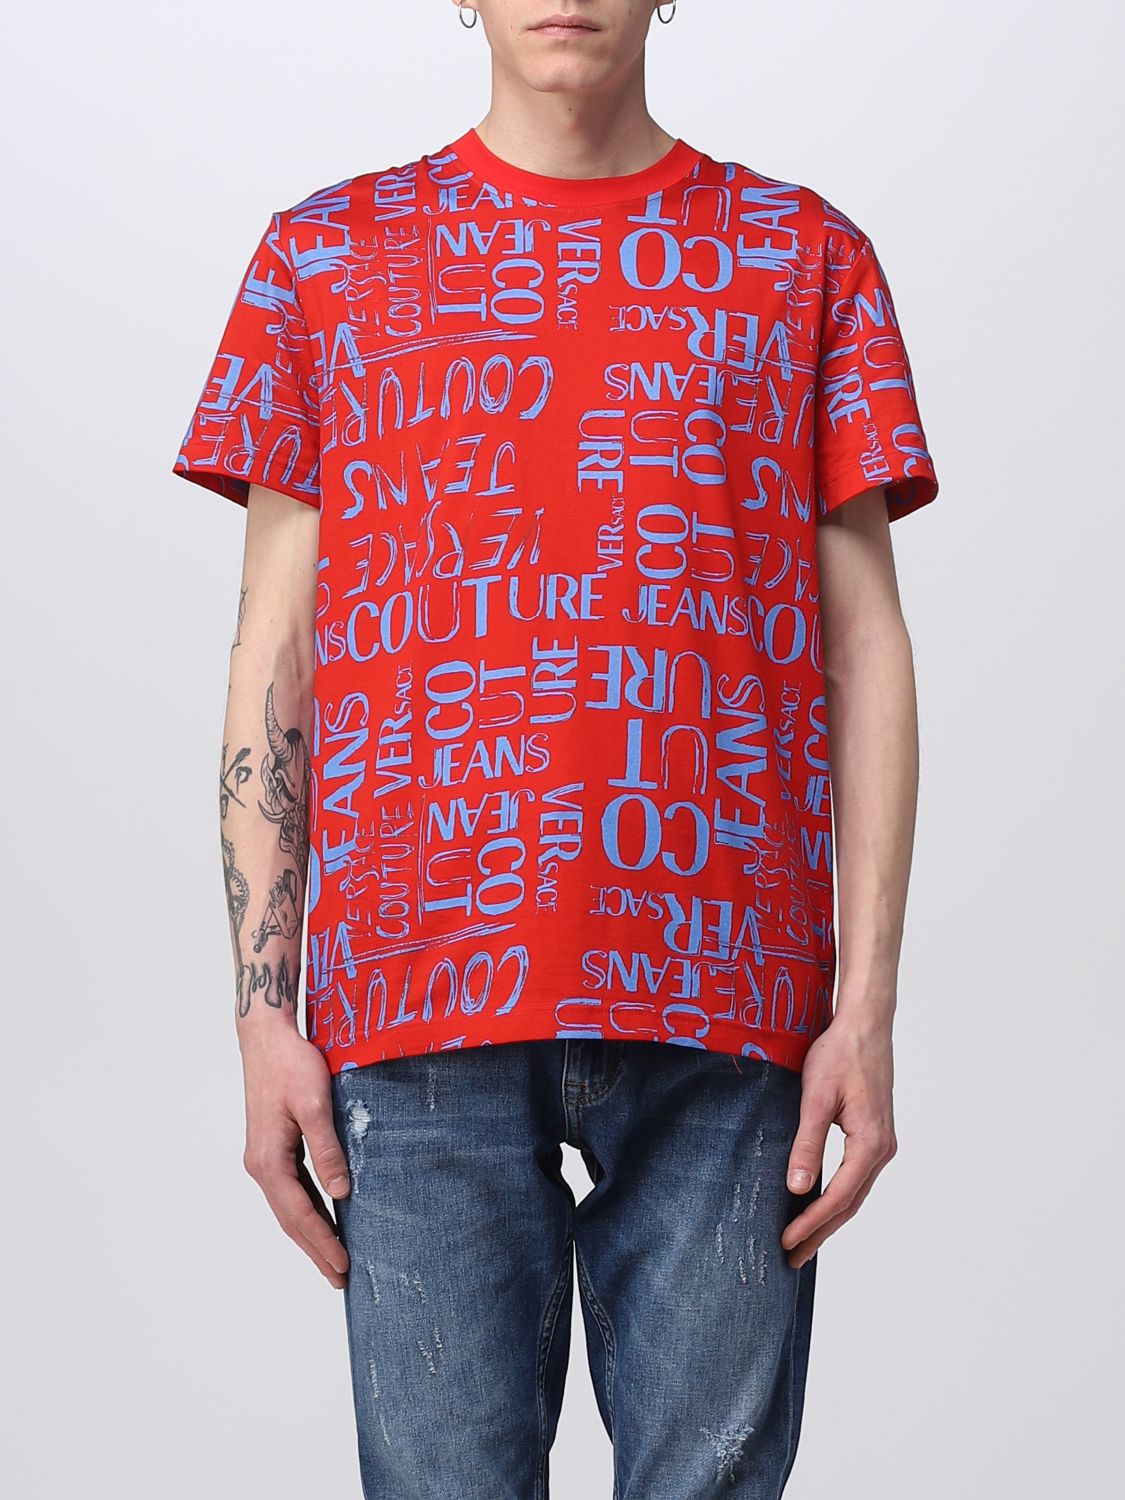 Versace Shirt in Red for Men